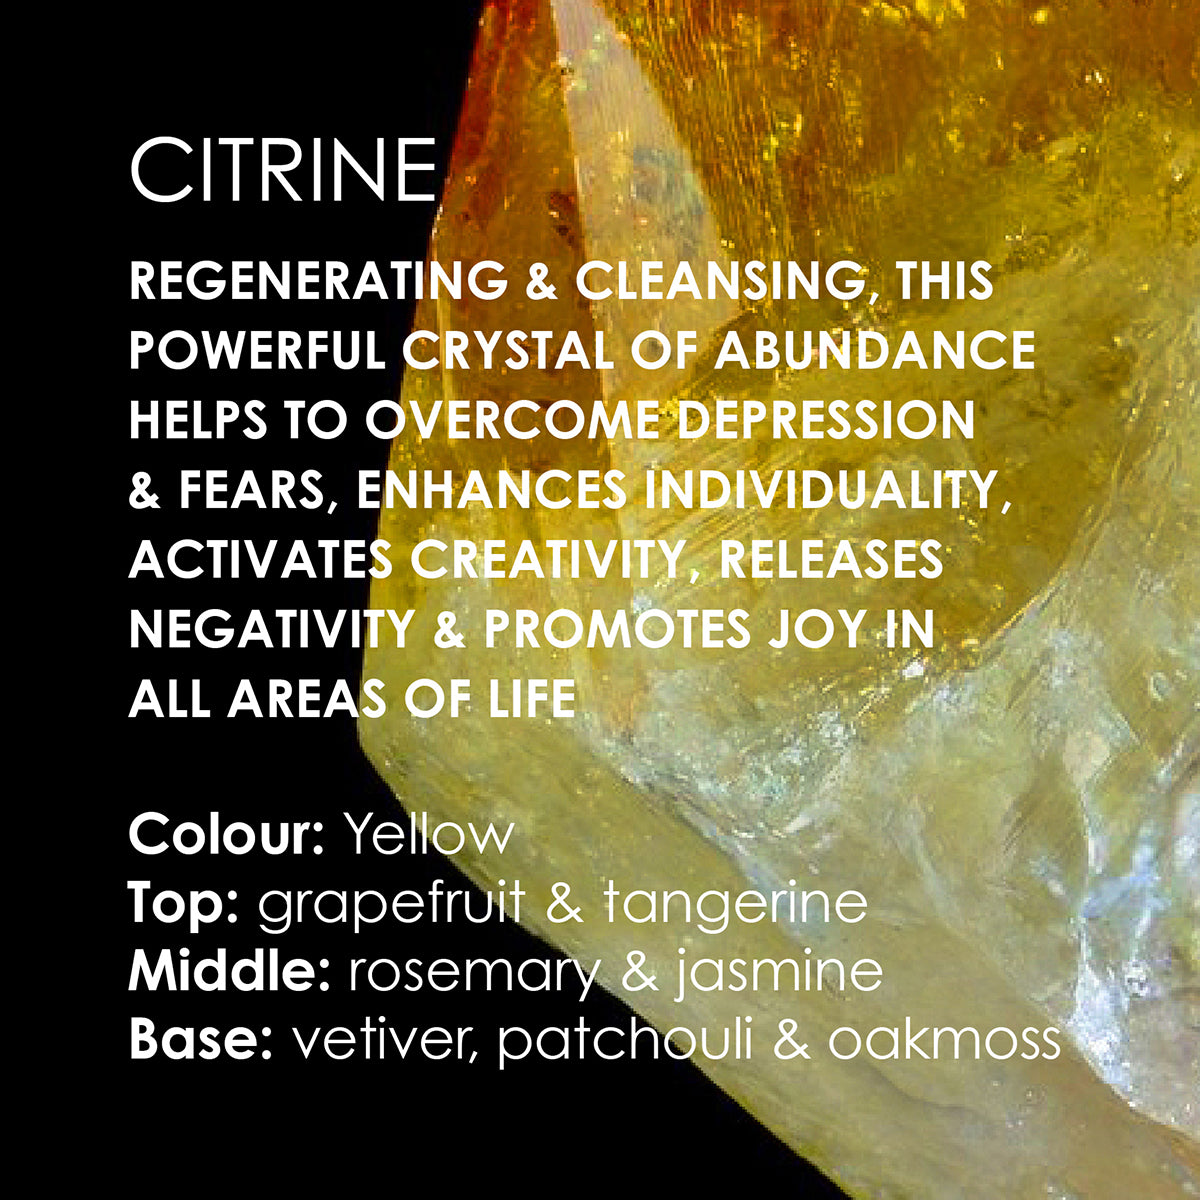 A graphic featuring properties of Citrine, describing it as regenerating, cleansing, and a powerful crystal of abundance. It lists benefits like overcoming depression and fears, enhancing individuality, activating creativity, releasing negativity, and promoting joy. The color is noted as yellow, with scent notes of top: grapefruit & tangerine, middle: rosemary & jasmine, and base: vetiver, patchouli & oakmoss, against a background image of a citrine crystal.